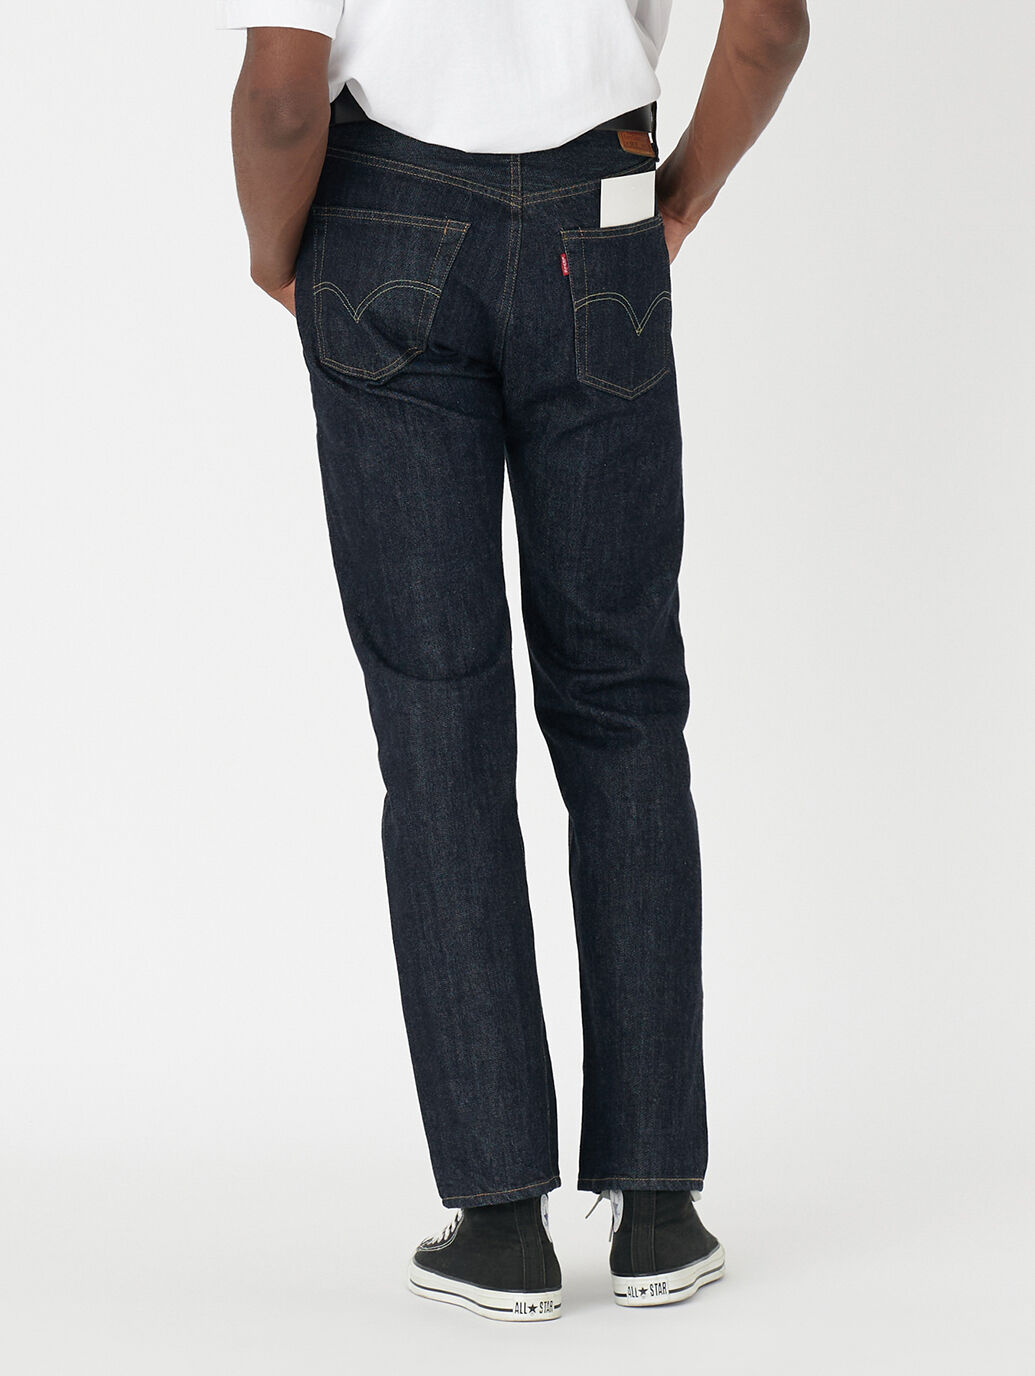 LEVI'S® VINTAGE CLOTHING1947モデル 501® JEANS NEW RINSE 